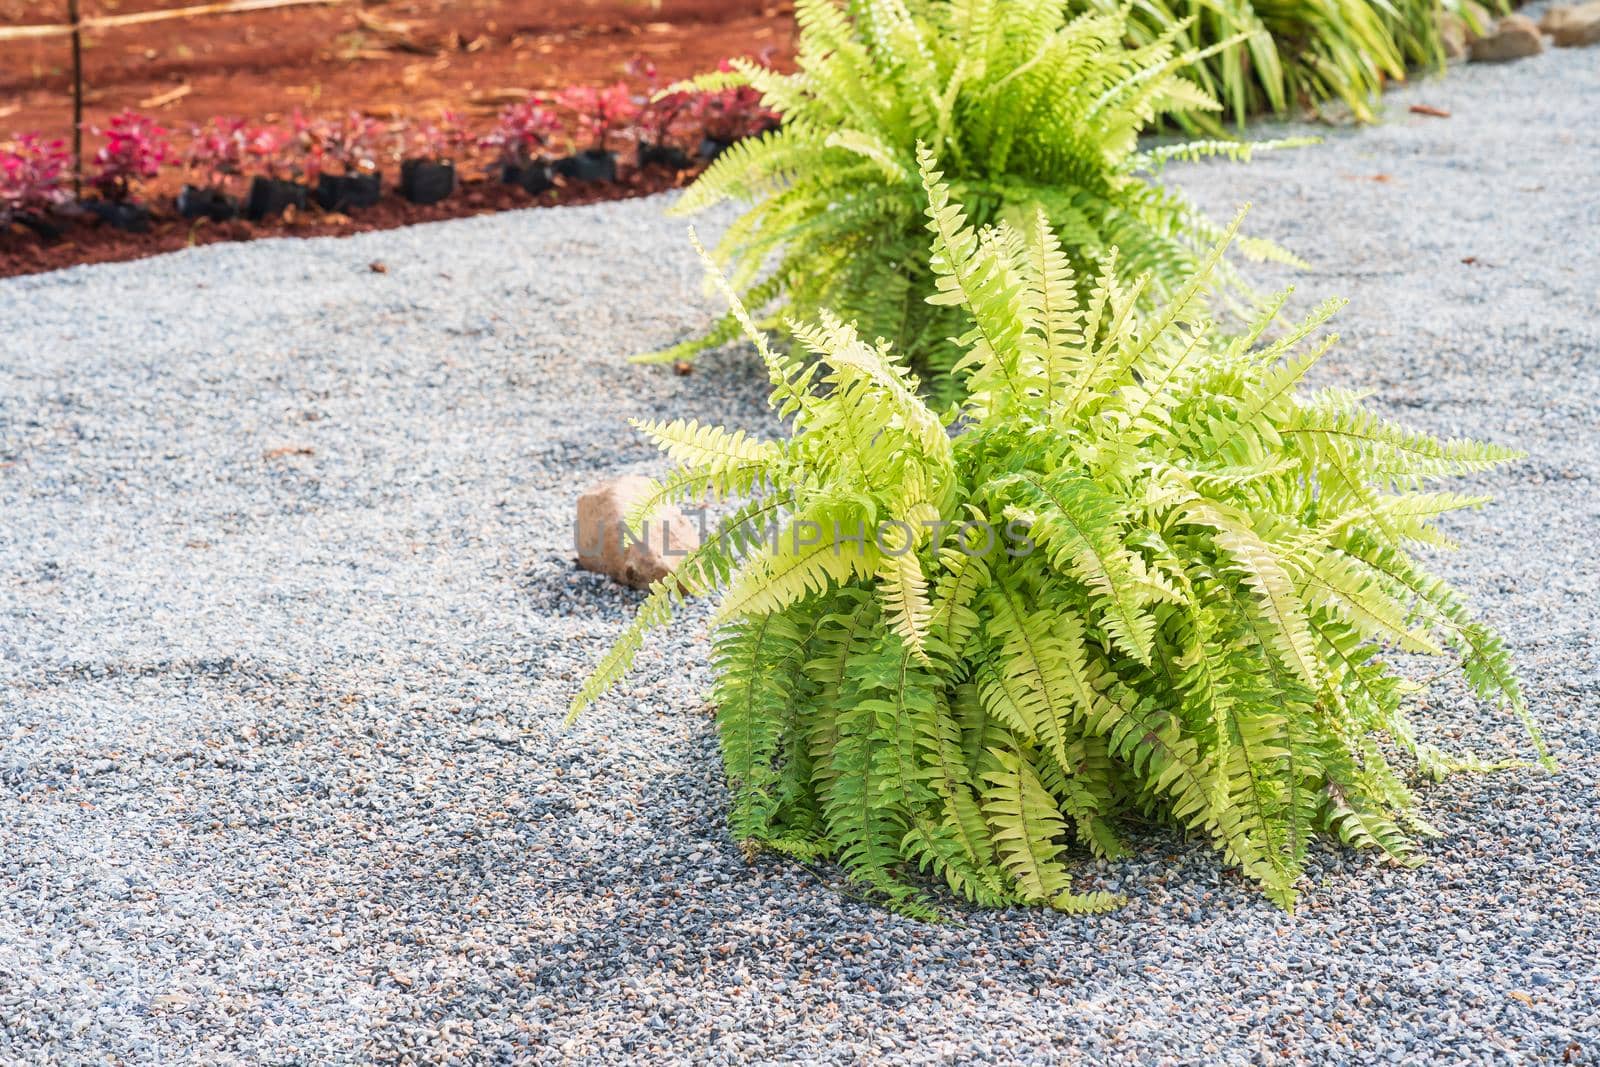 Fern plant on the pebble ground in garden